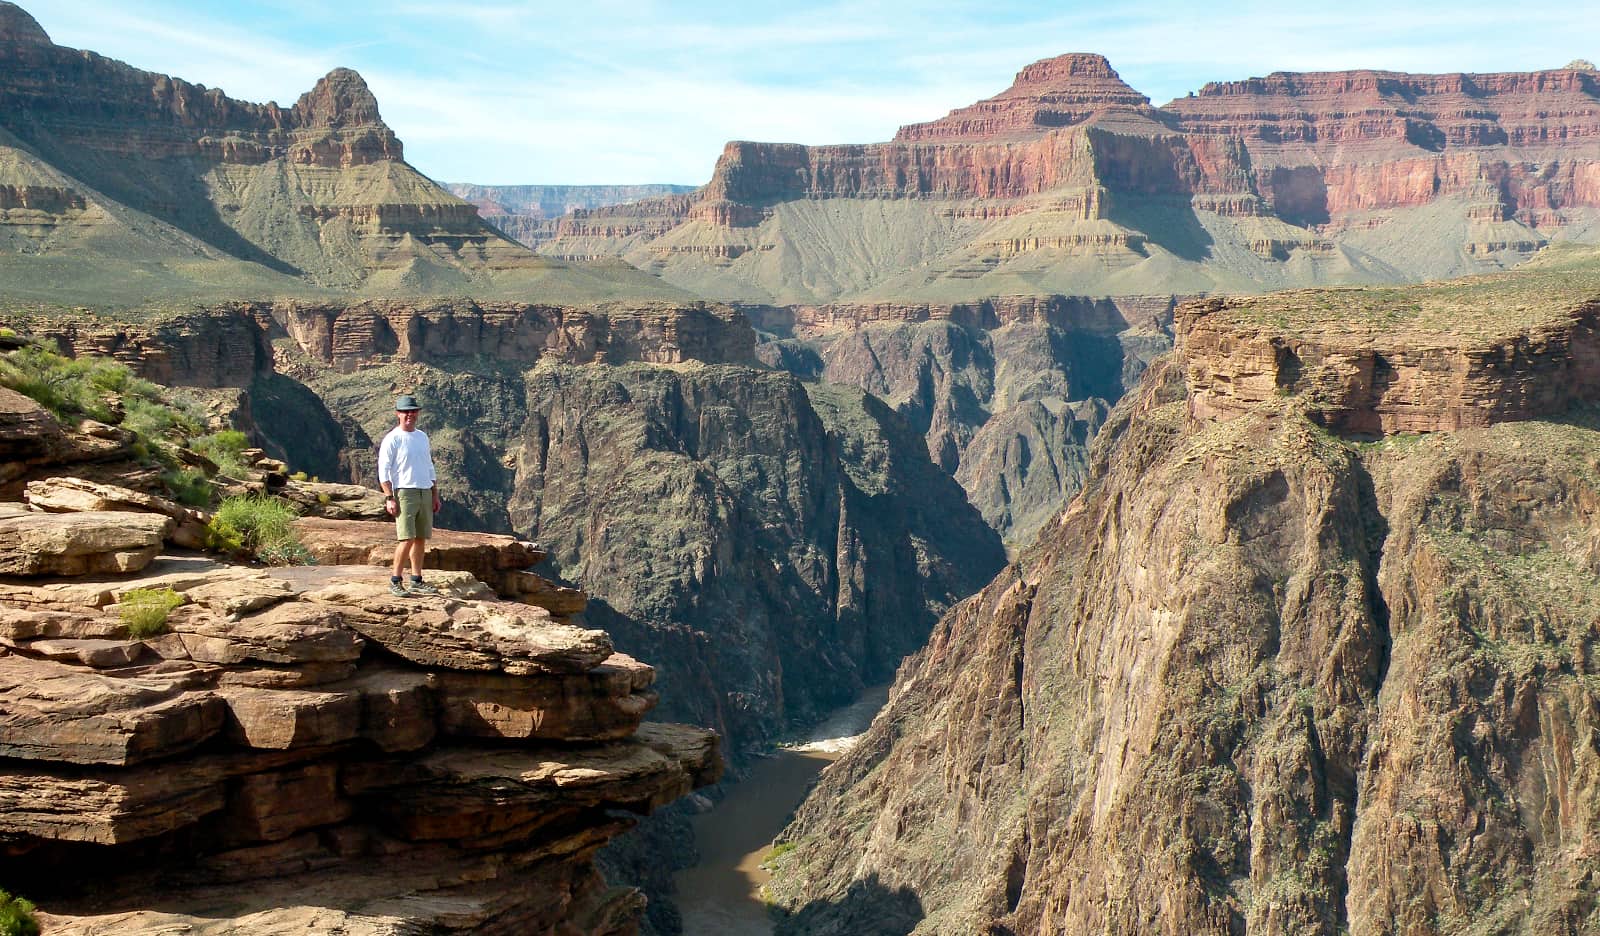 Person standing on edge of canyon